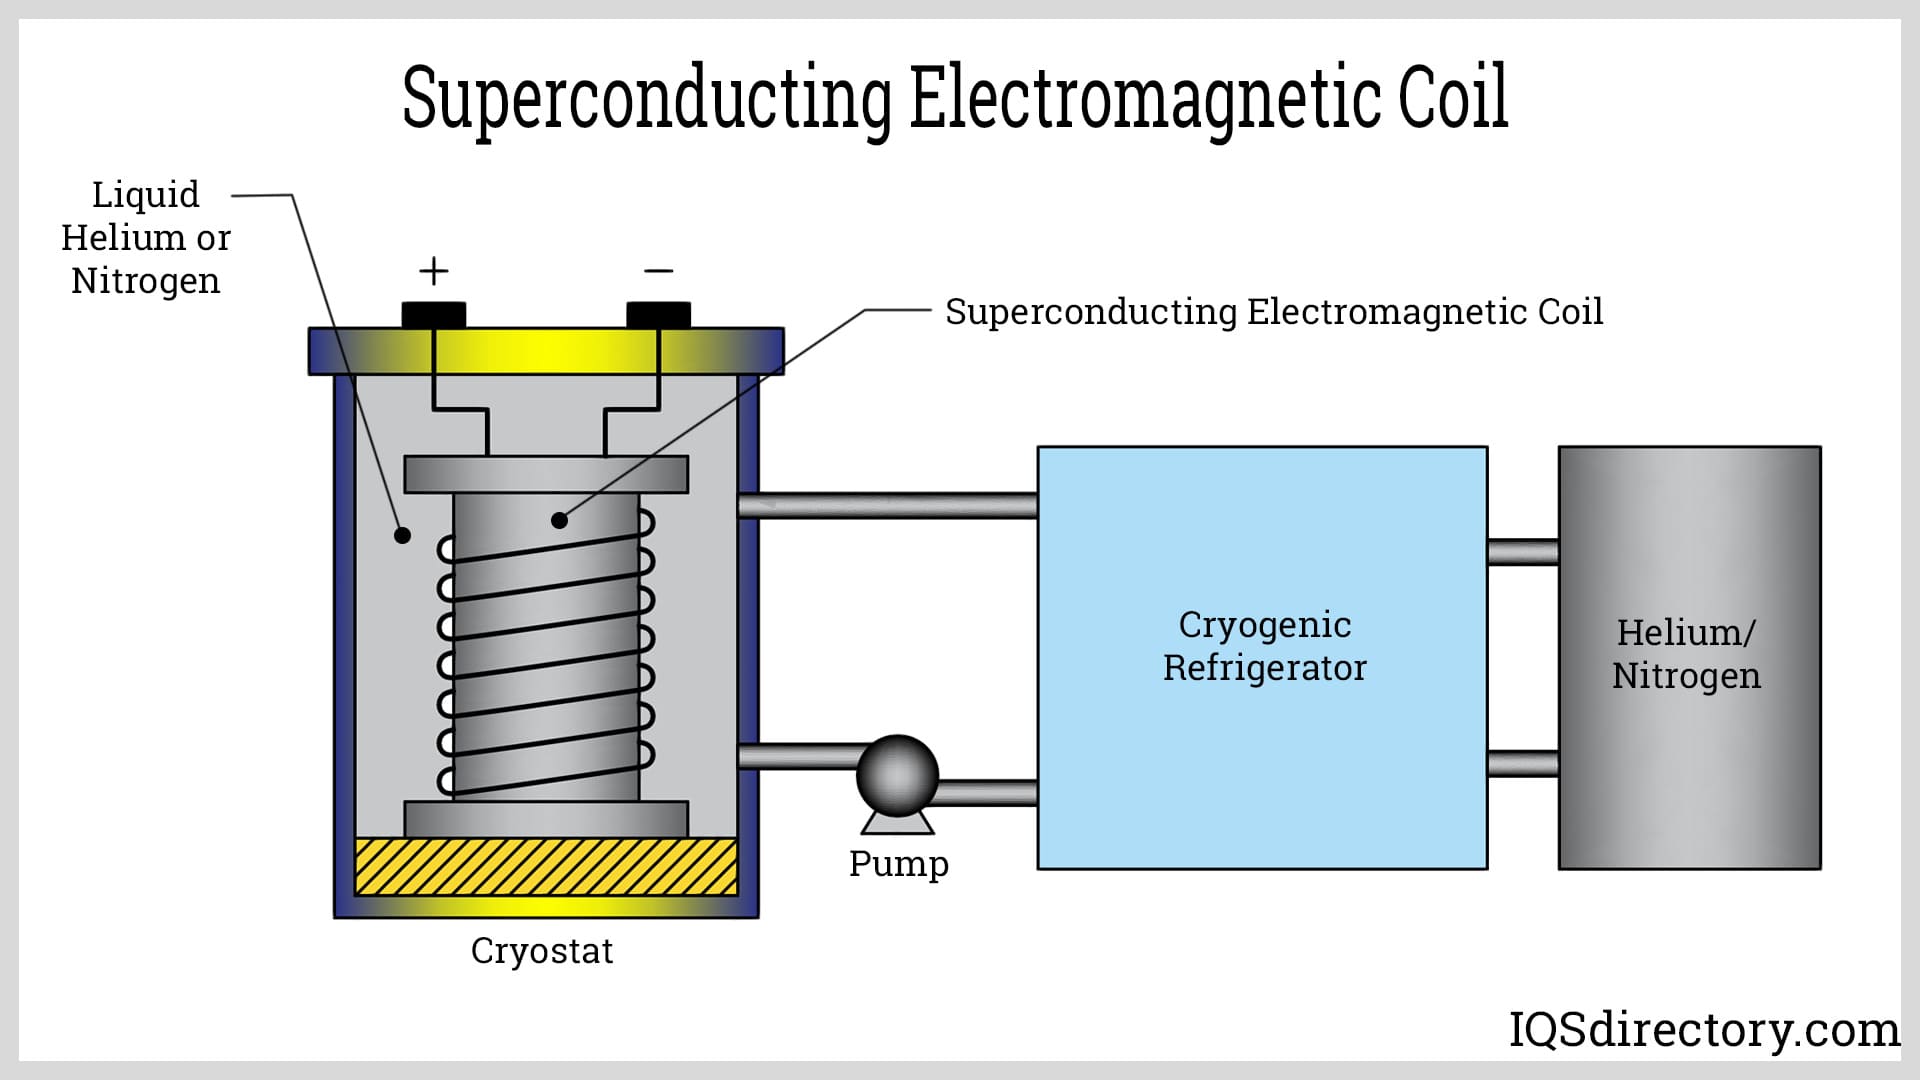 Superconducting Electromagnetic Coil